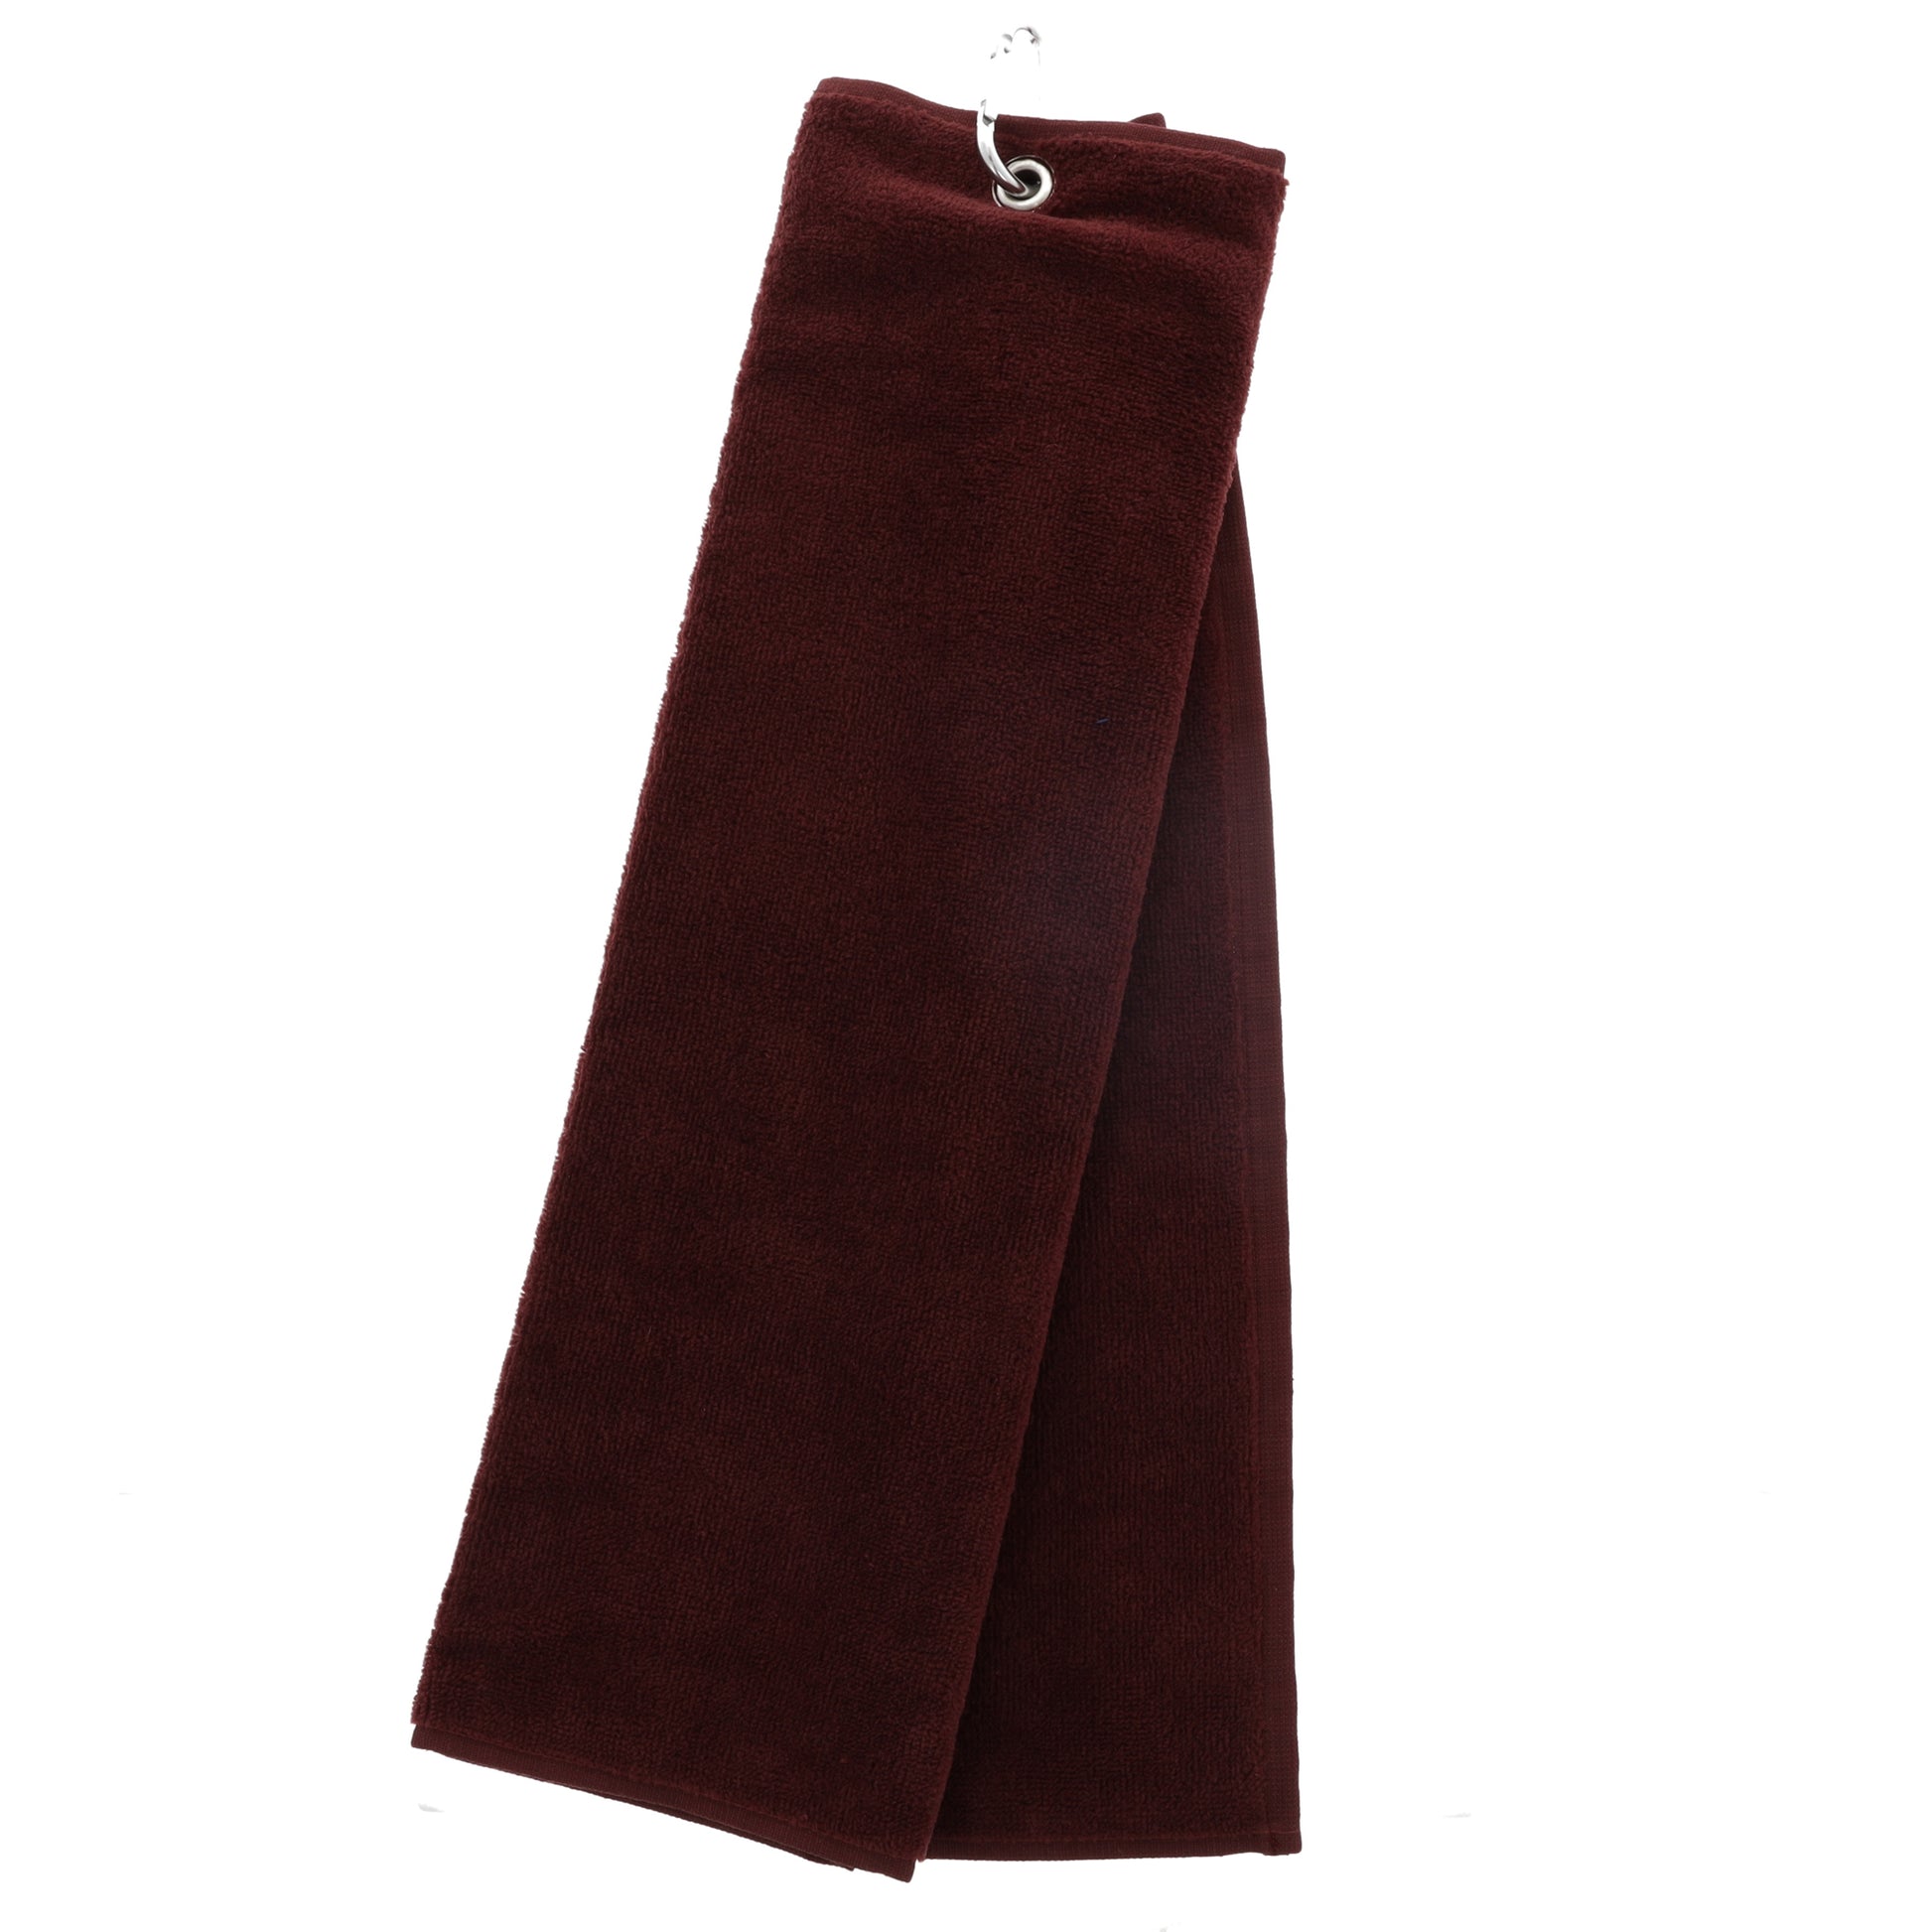 Personalised Embroidered Tri Fold TENNIS Towel Trifold with Carabiner Clip  - Always Looking Good - Burgundy (Wine)  